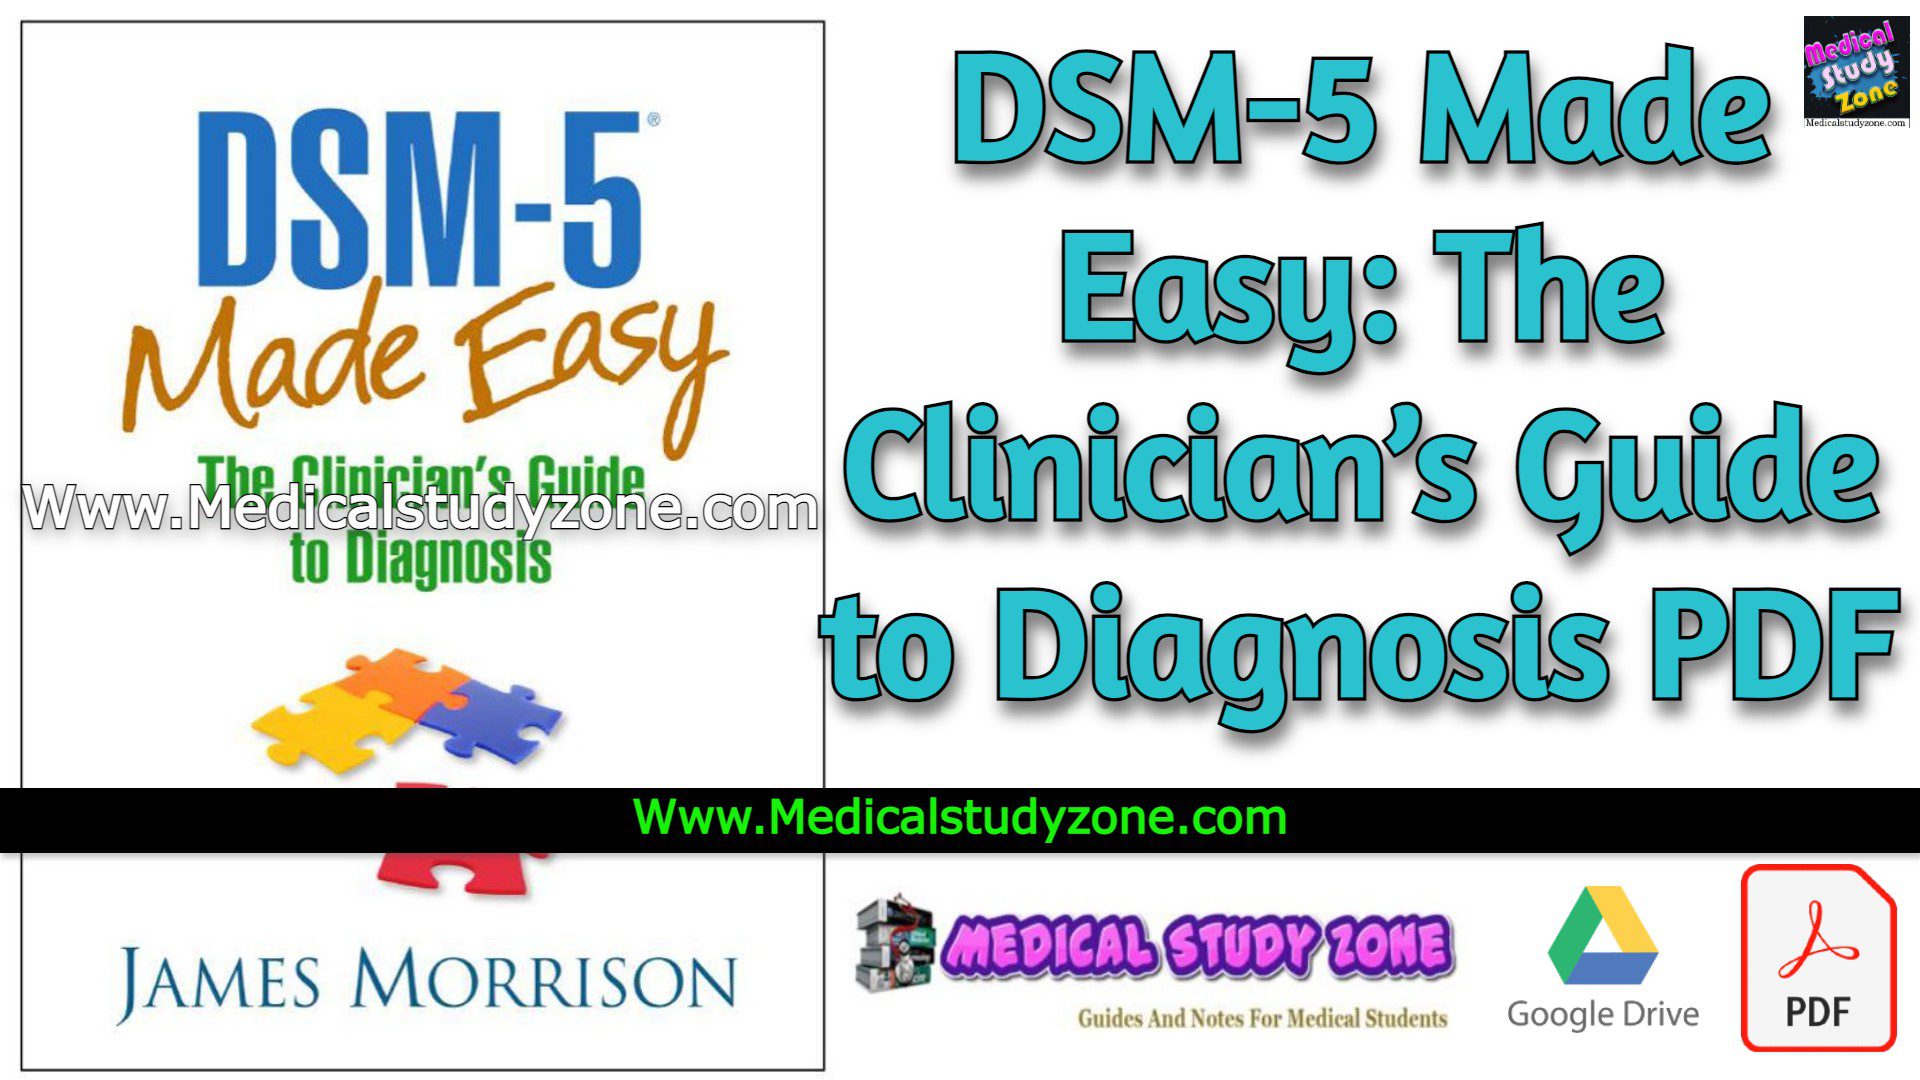 DSM-5 Made Easy: The Clinician’s Guide to Diagnosis PDF Free Download [Google Drive]